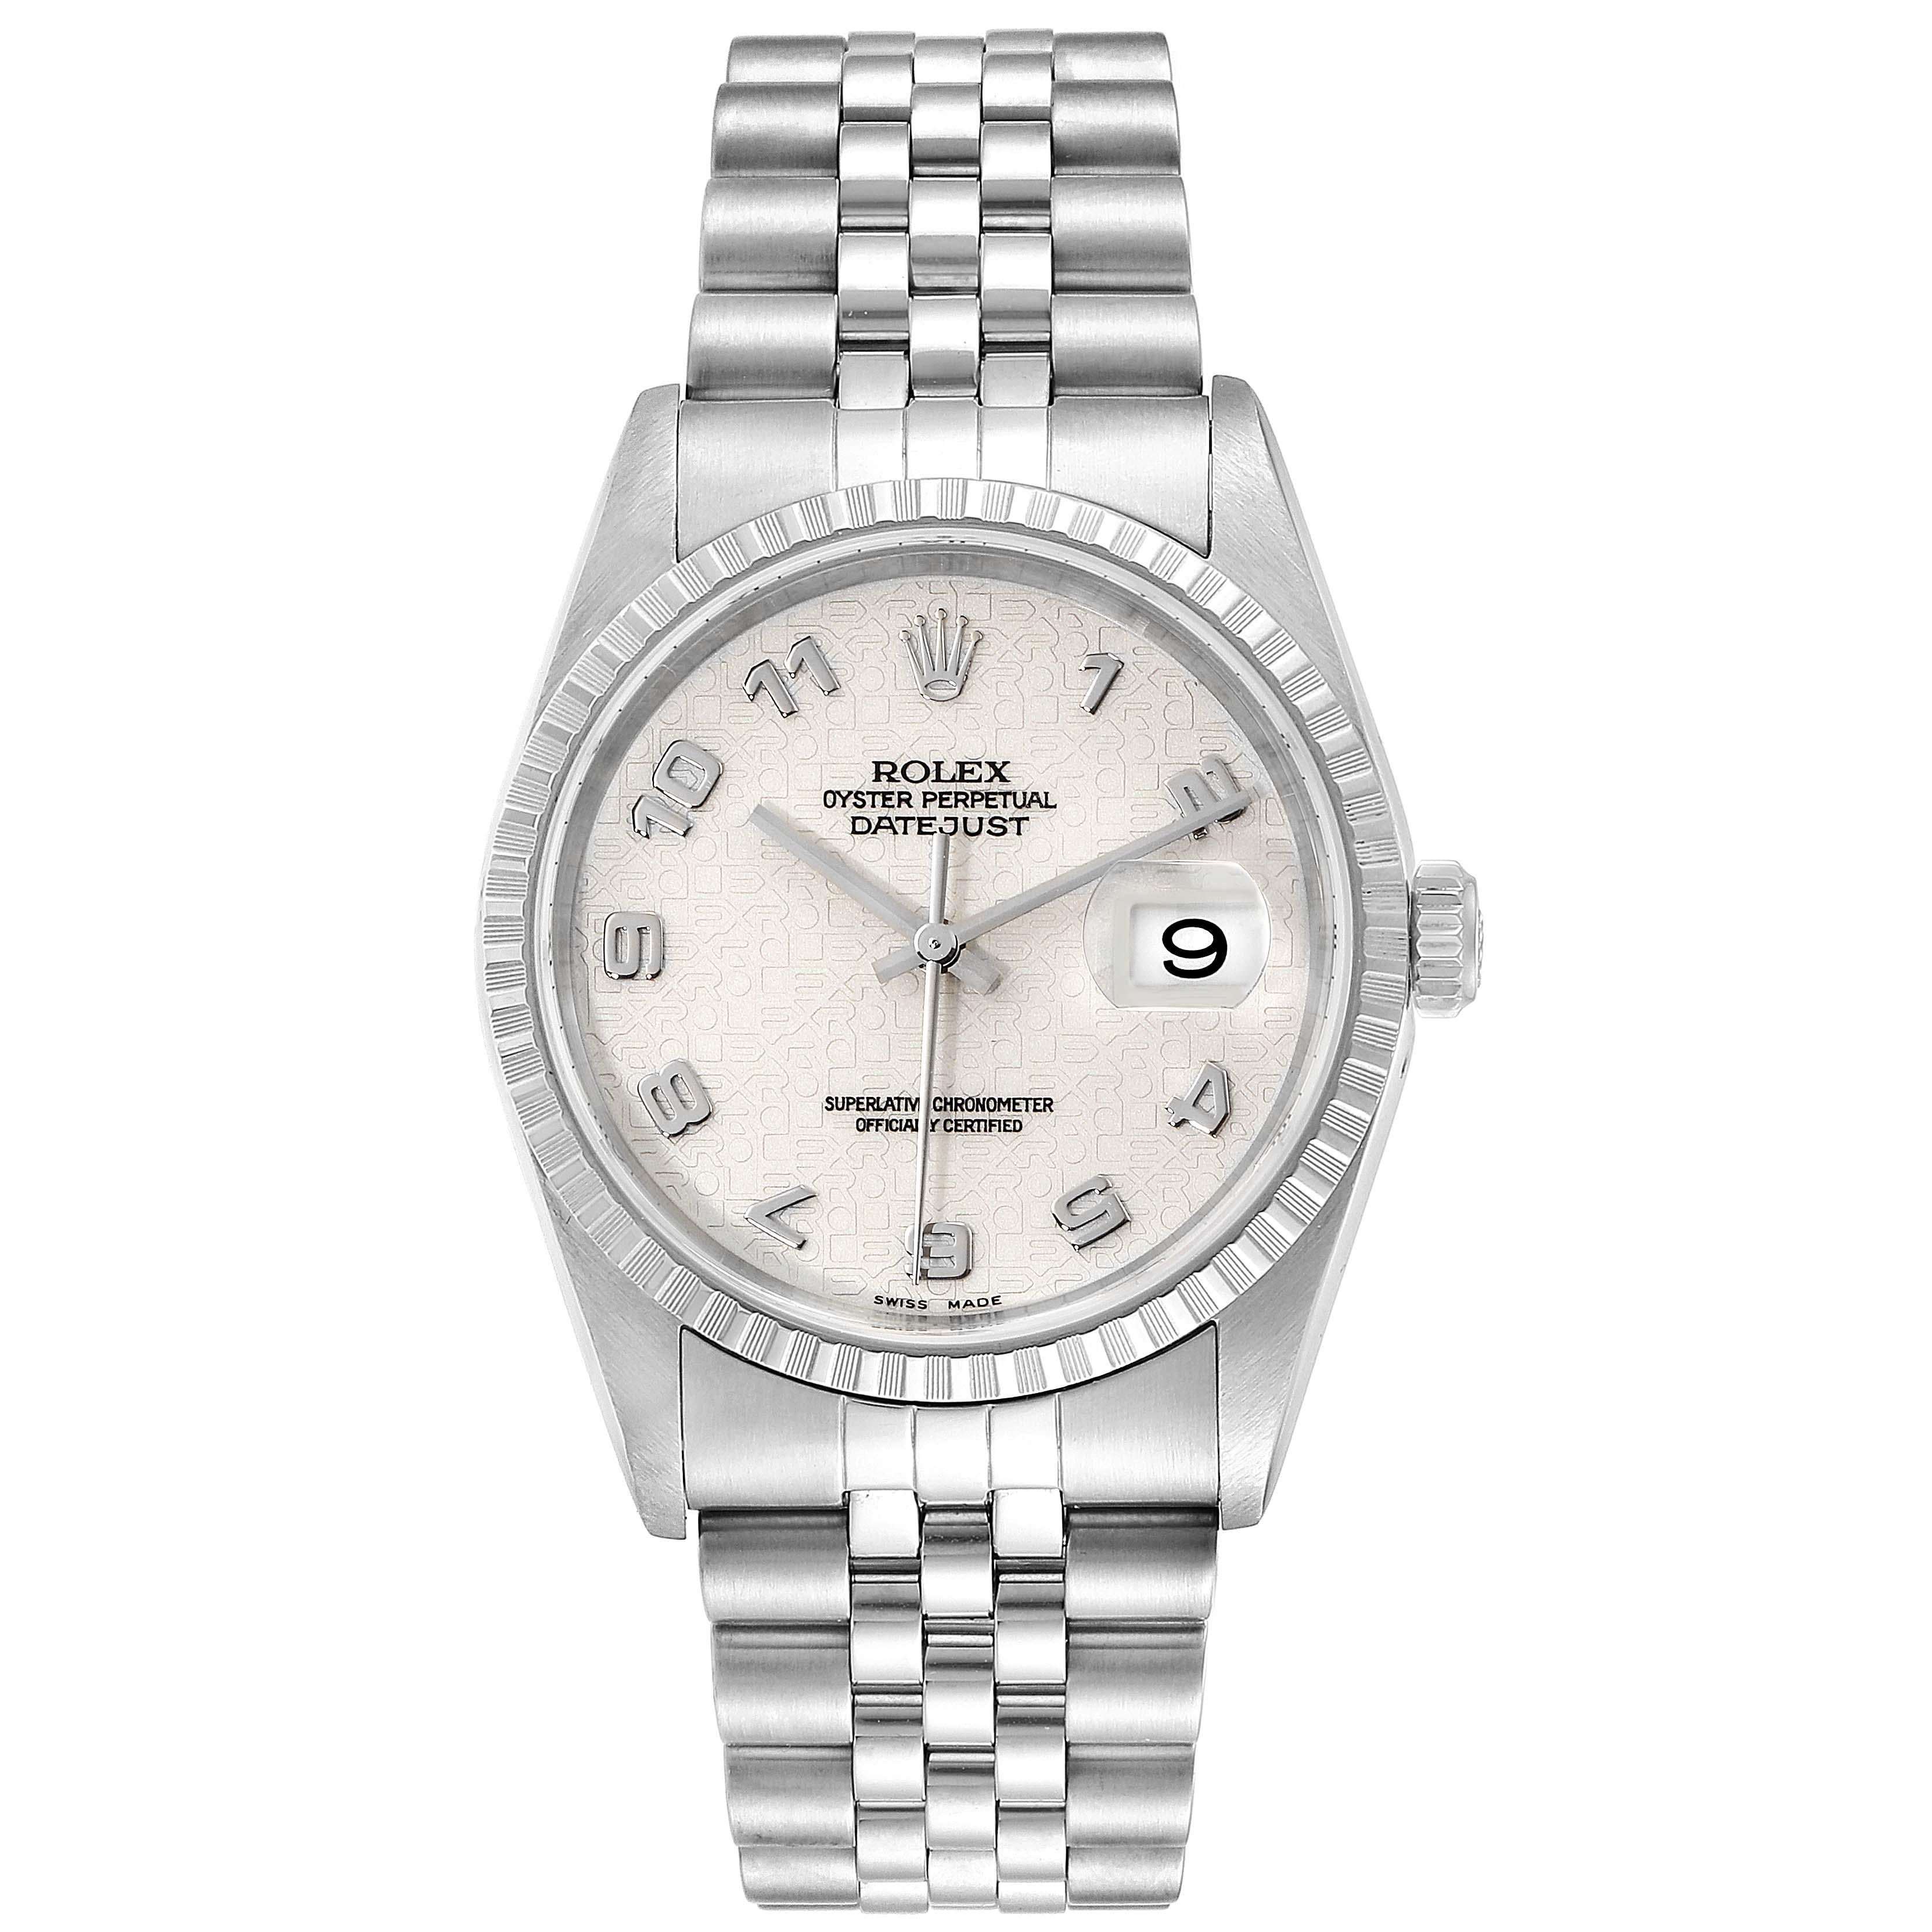 Rolex Datejust Anniversary Dial Jubilee Bracelet Steel Mens Watch 16220. Officially certified chronometer self-winding movement. Stainless steel oyster case 36.0 mm in diameter. Rolex logo on a crown. Stainless steel engine turned bezel. Scratch